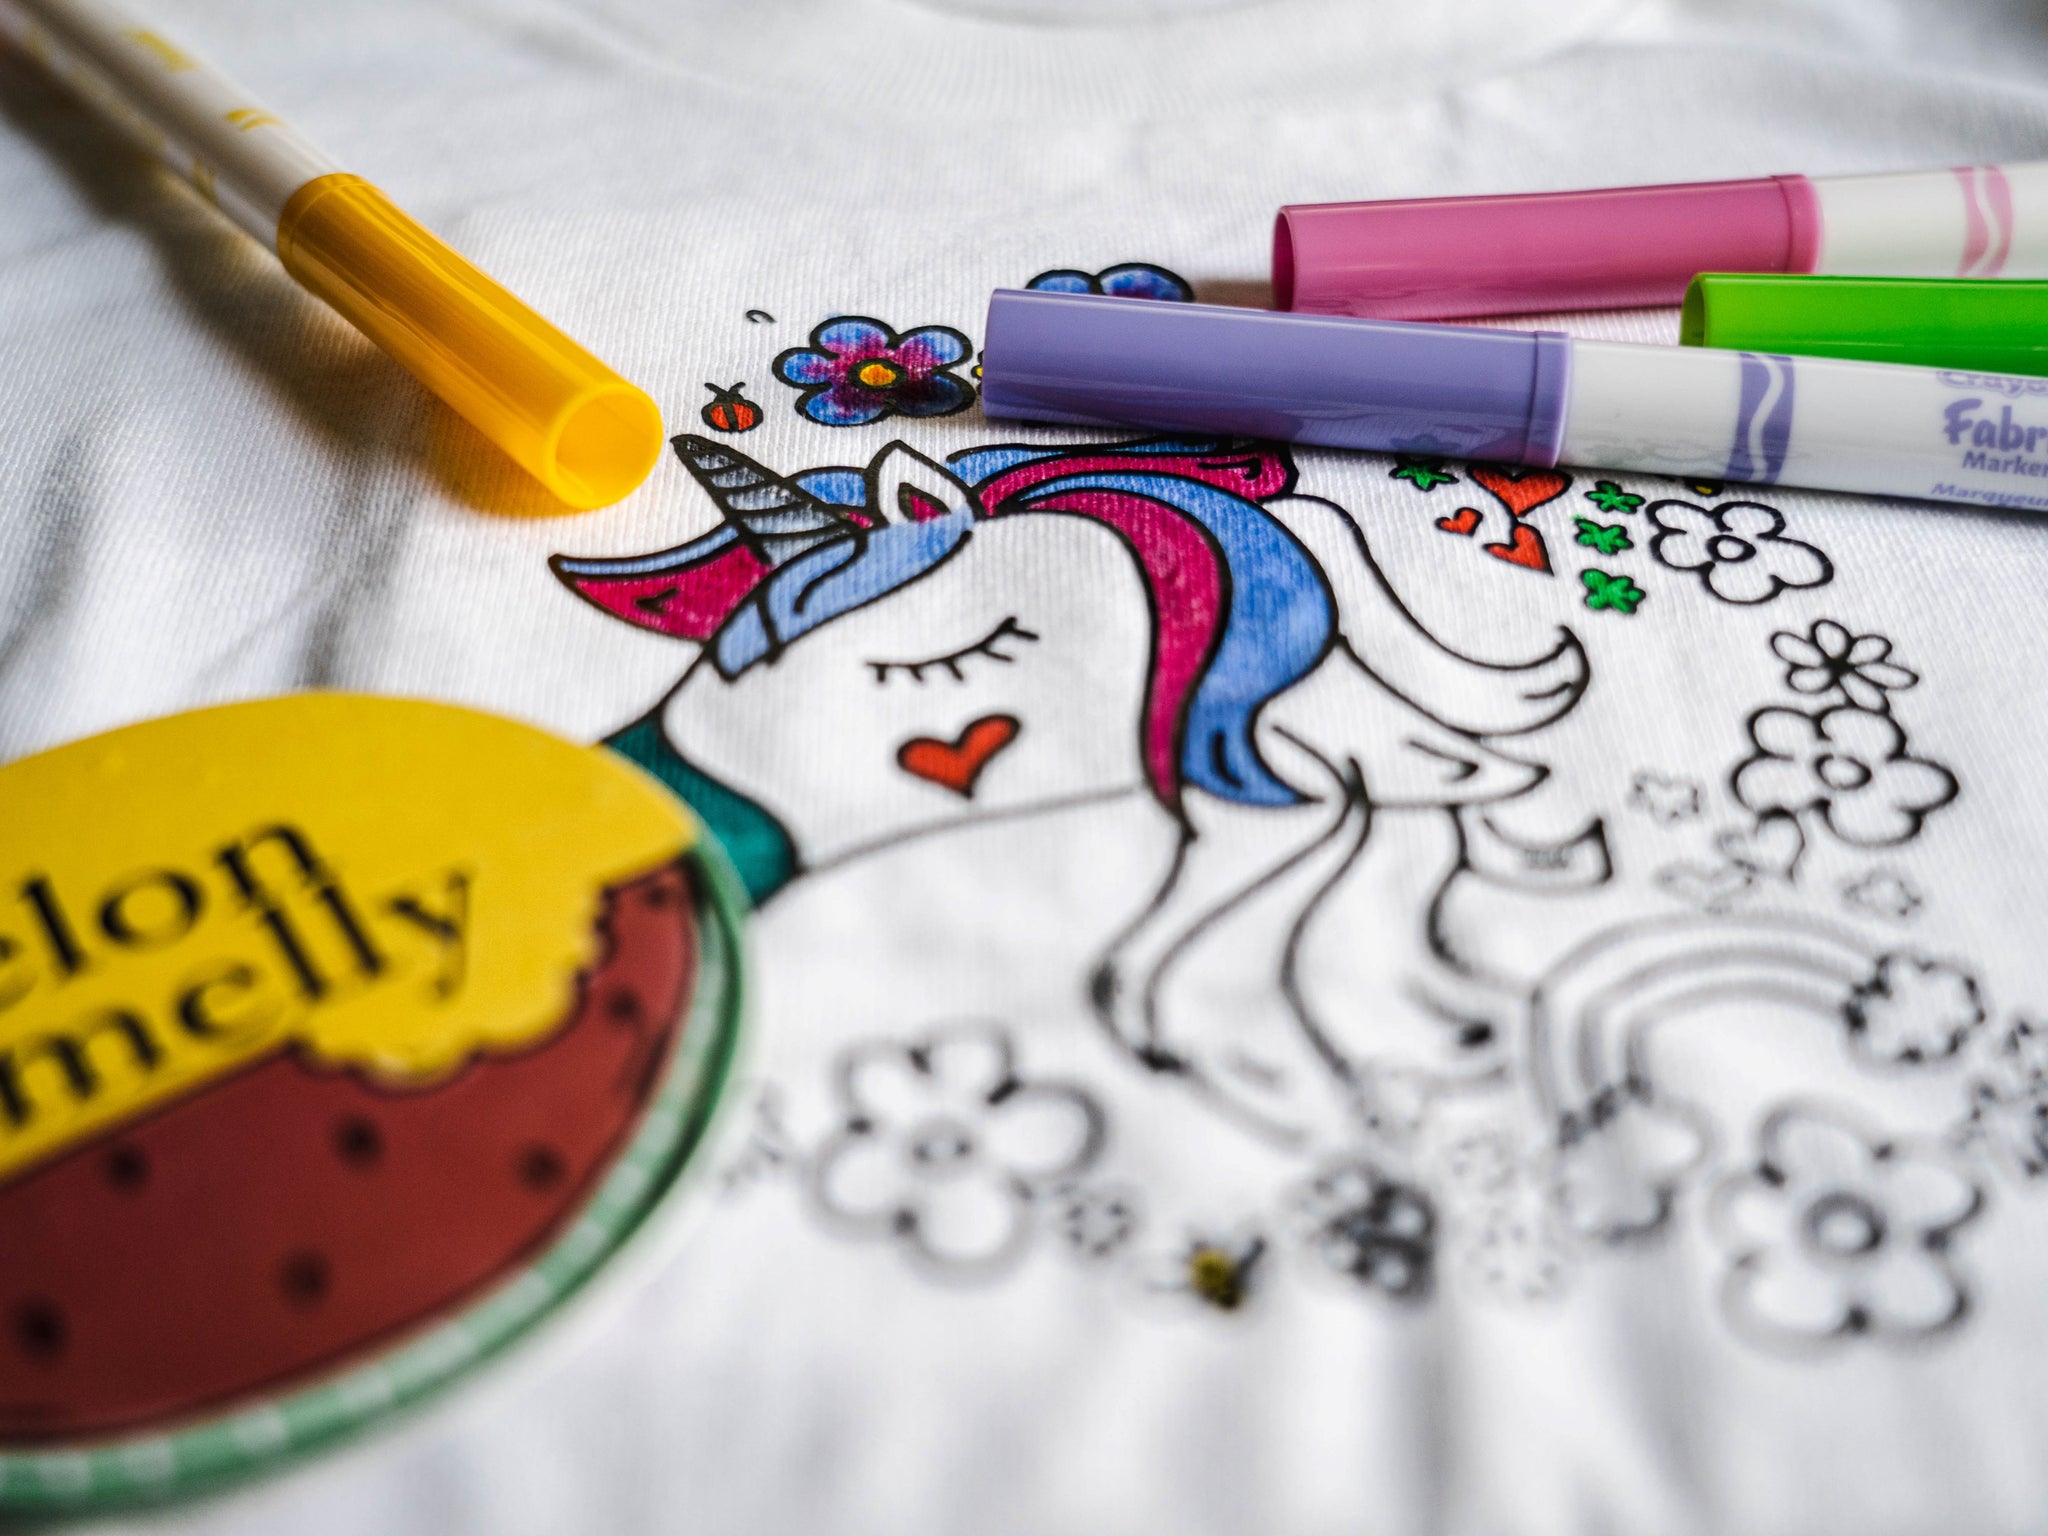 Kids T-shirts “Little Monster” with Textile Markers on